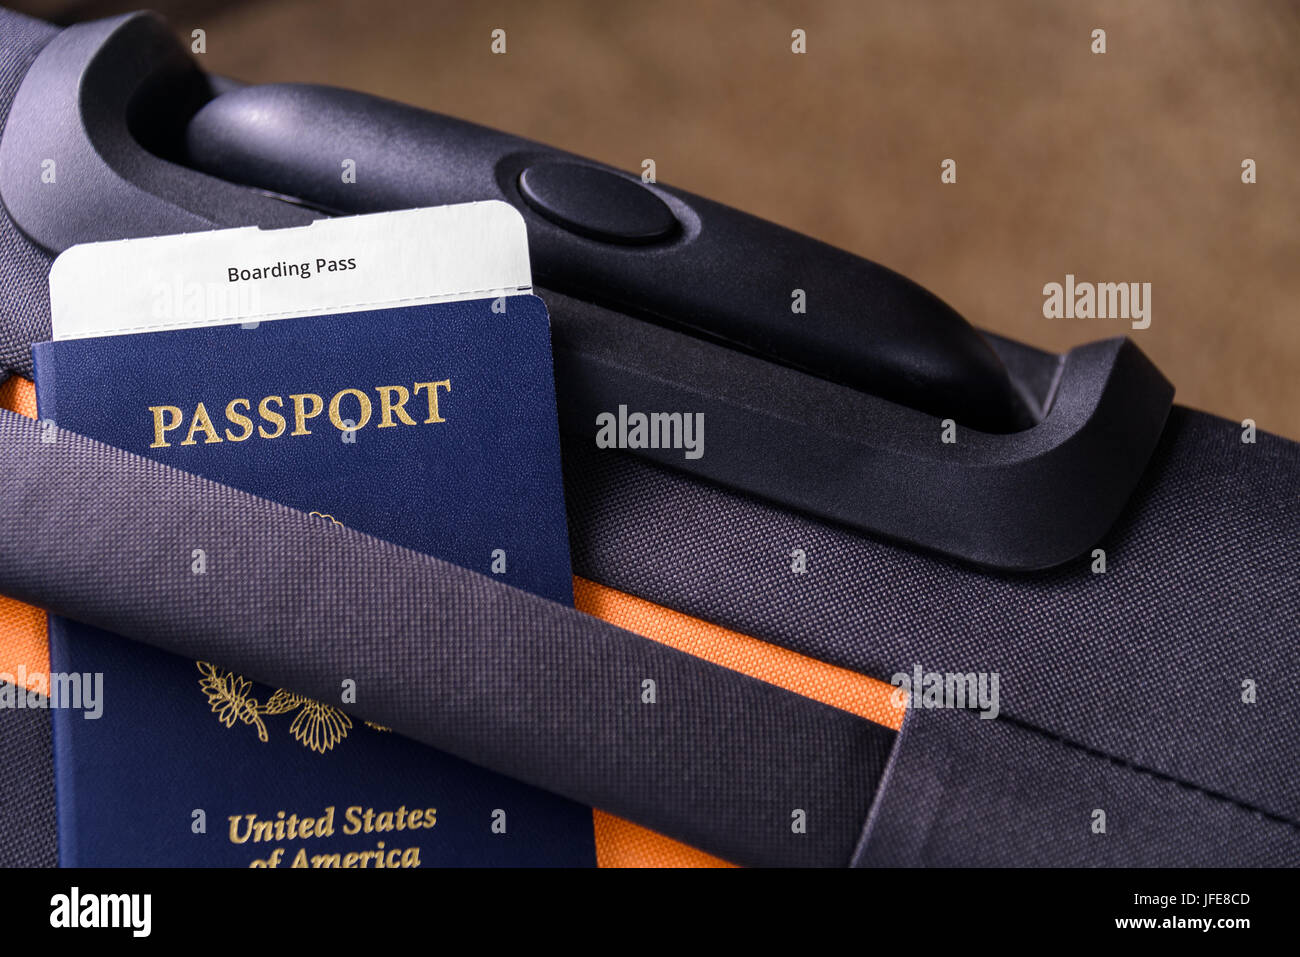 US passport and a boarding pass on a suitcase Stock Photo